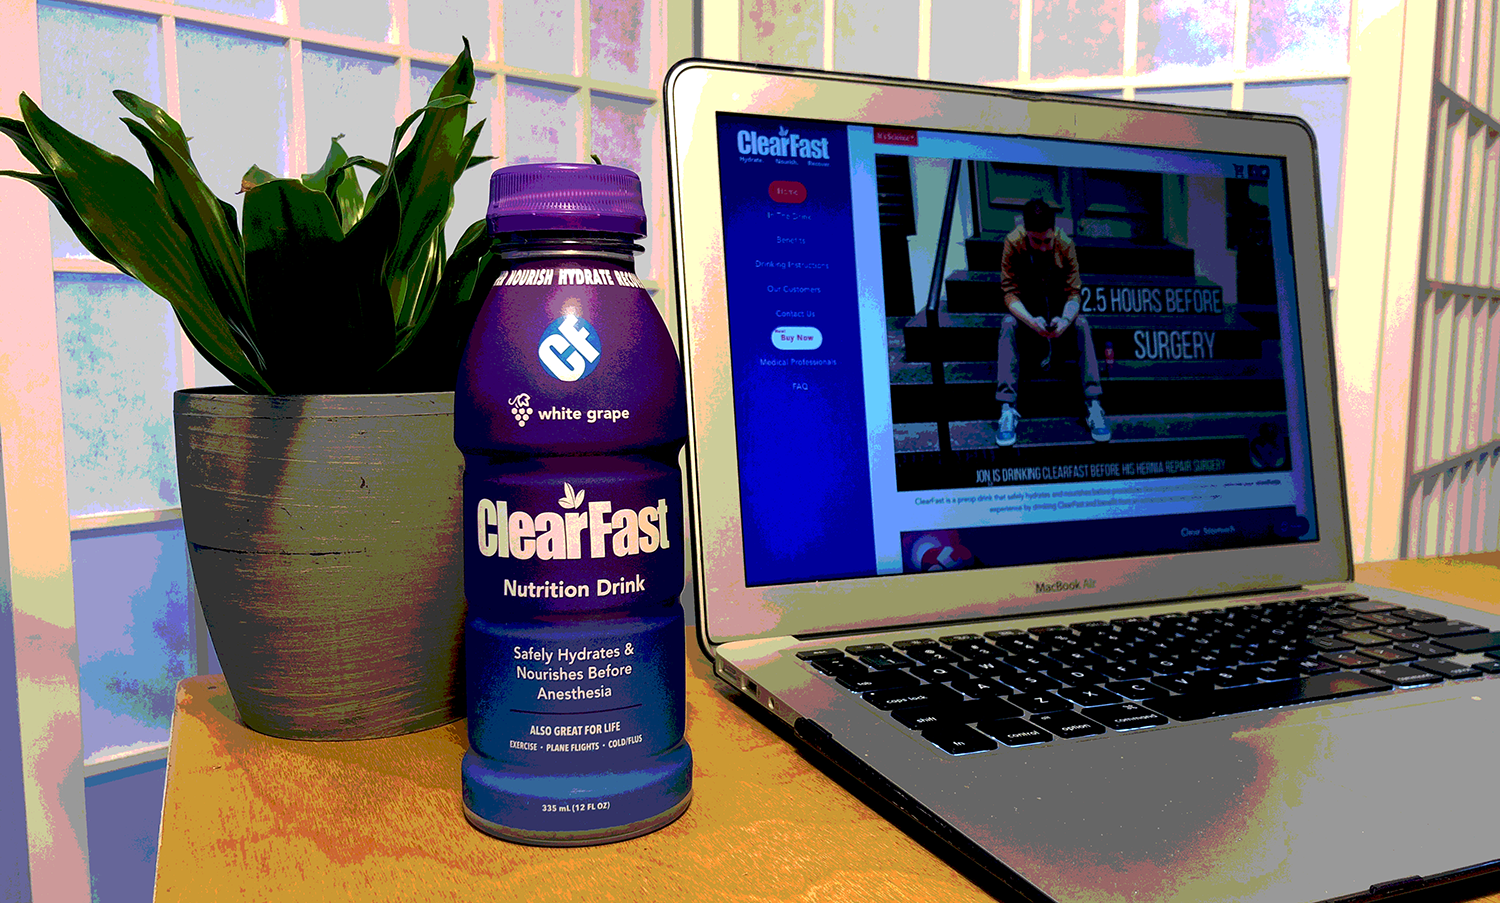 clearfast pre surgery carbohydrate drink